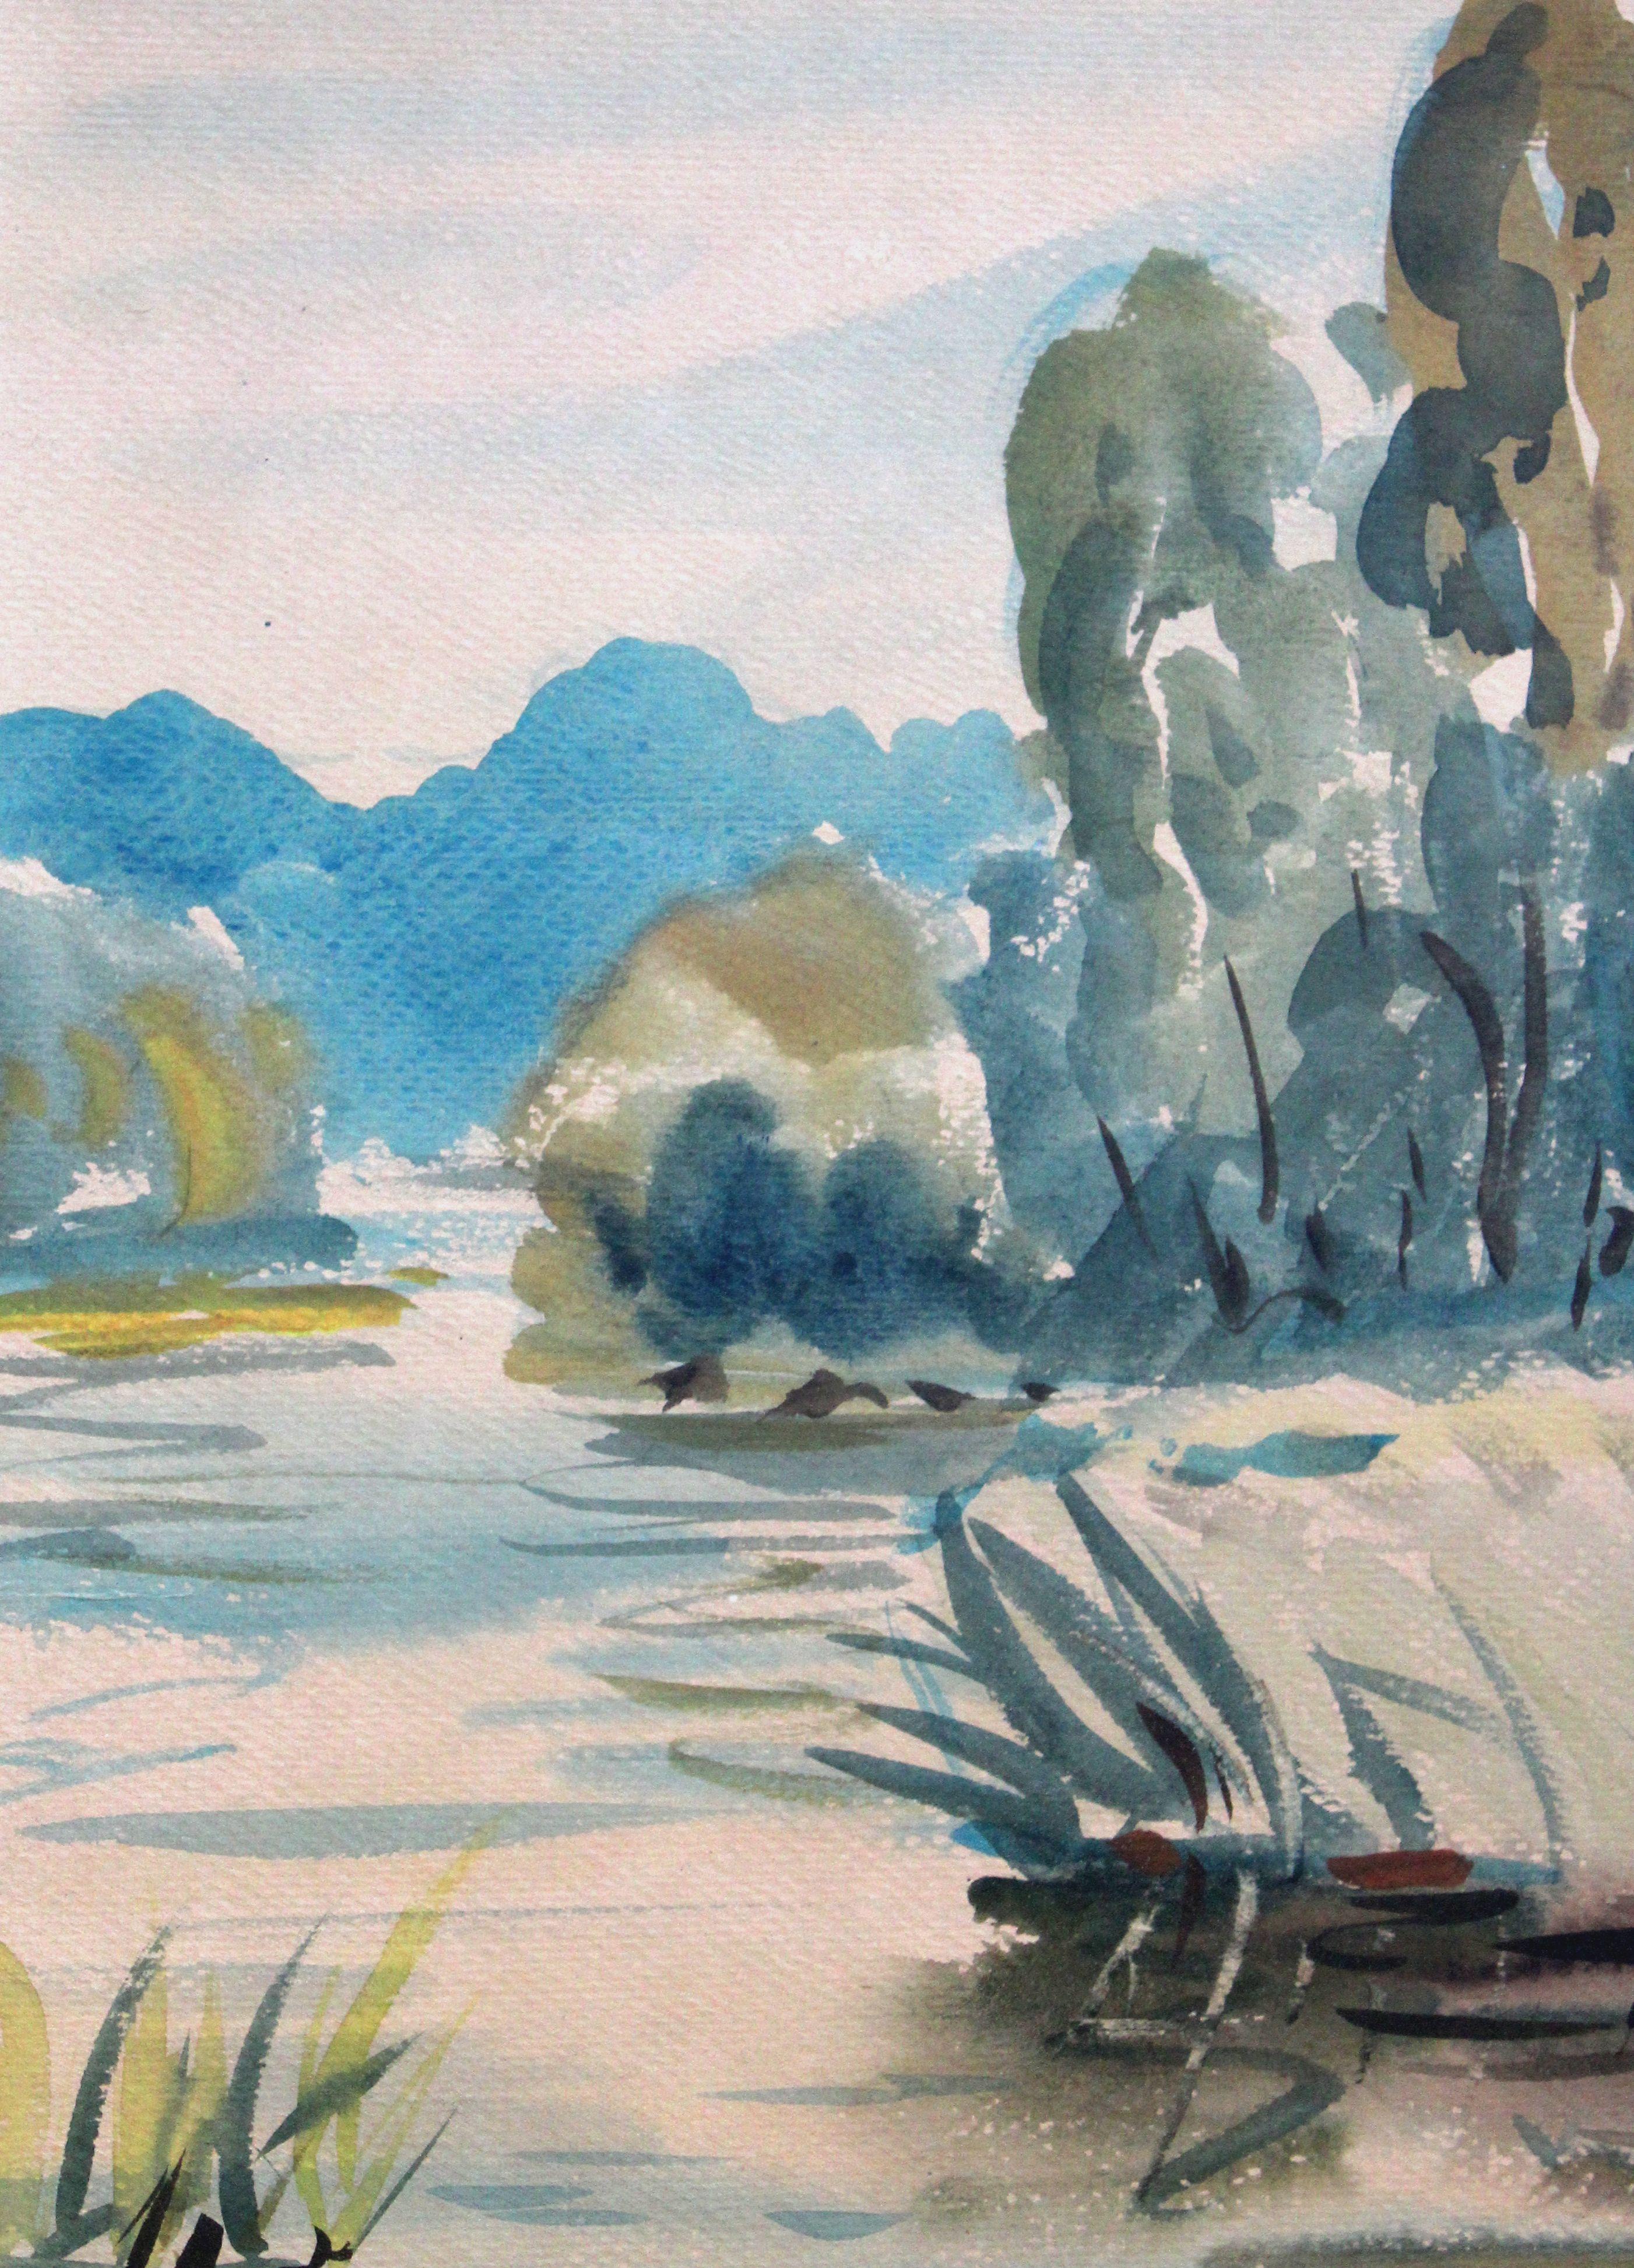 River. 1960, watercolor on paper, 43x61 cm

Janis Brekte (1920.15.VIII – 1985.27.XII)
Janis Brekte his first artistic education got in drawing courses of K. Brencens (1936 – 39).
He studied in Latvia Art academy (1940 – 48) and his pedagogues were